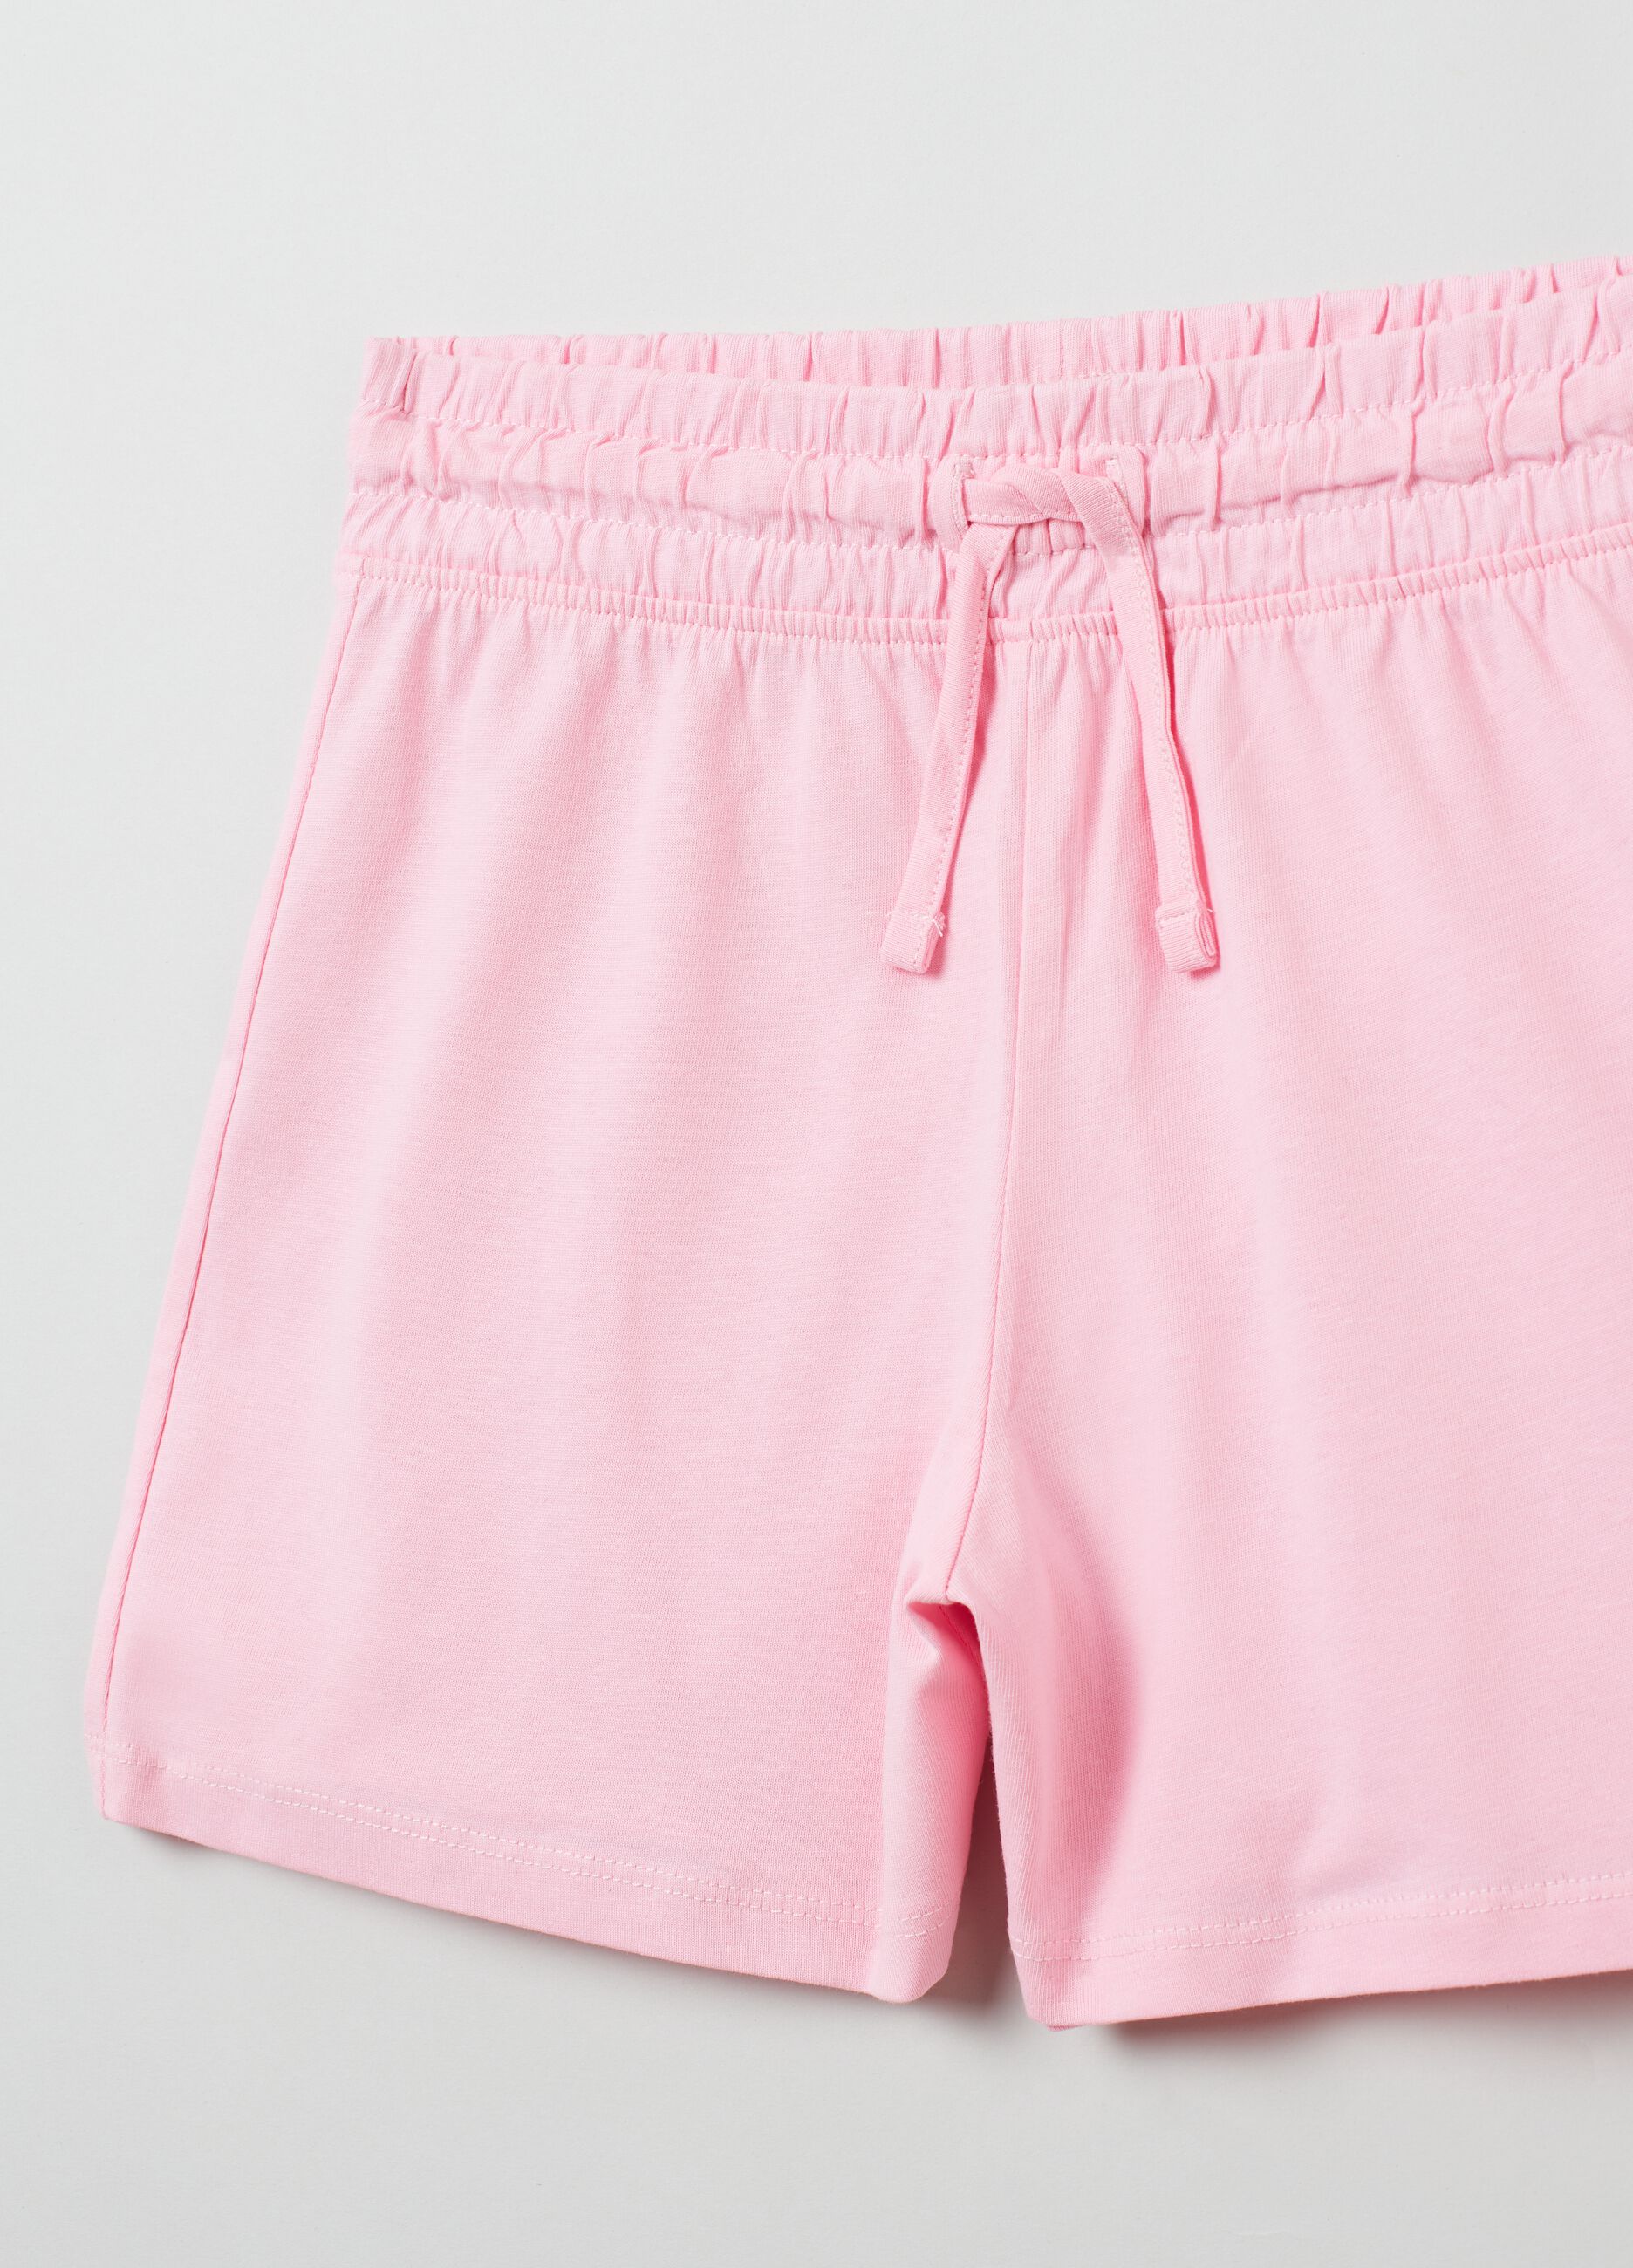 Jersey shorts with drawstring